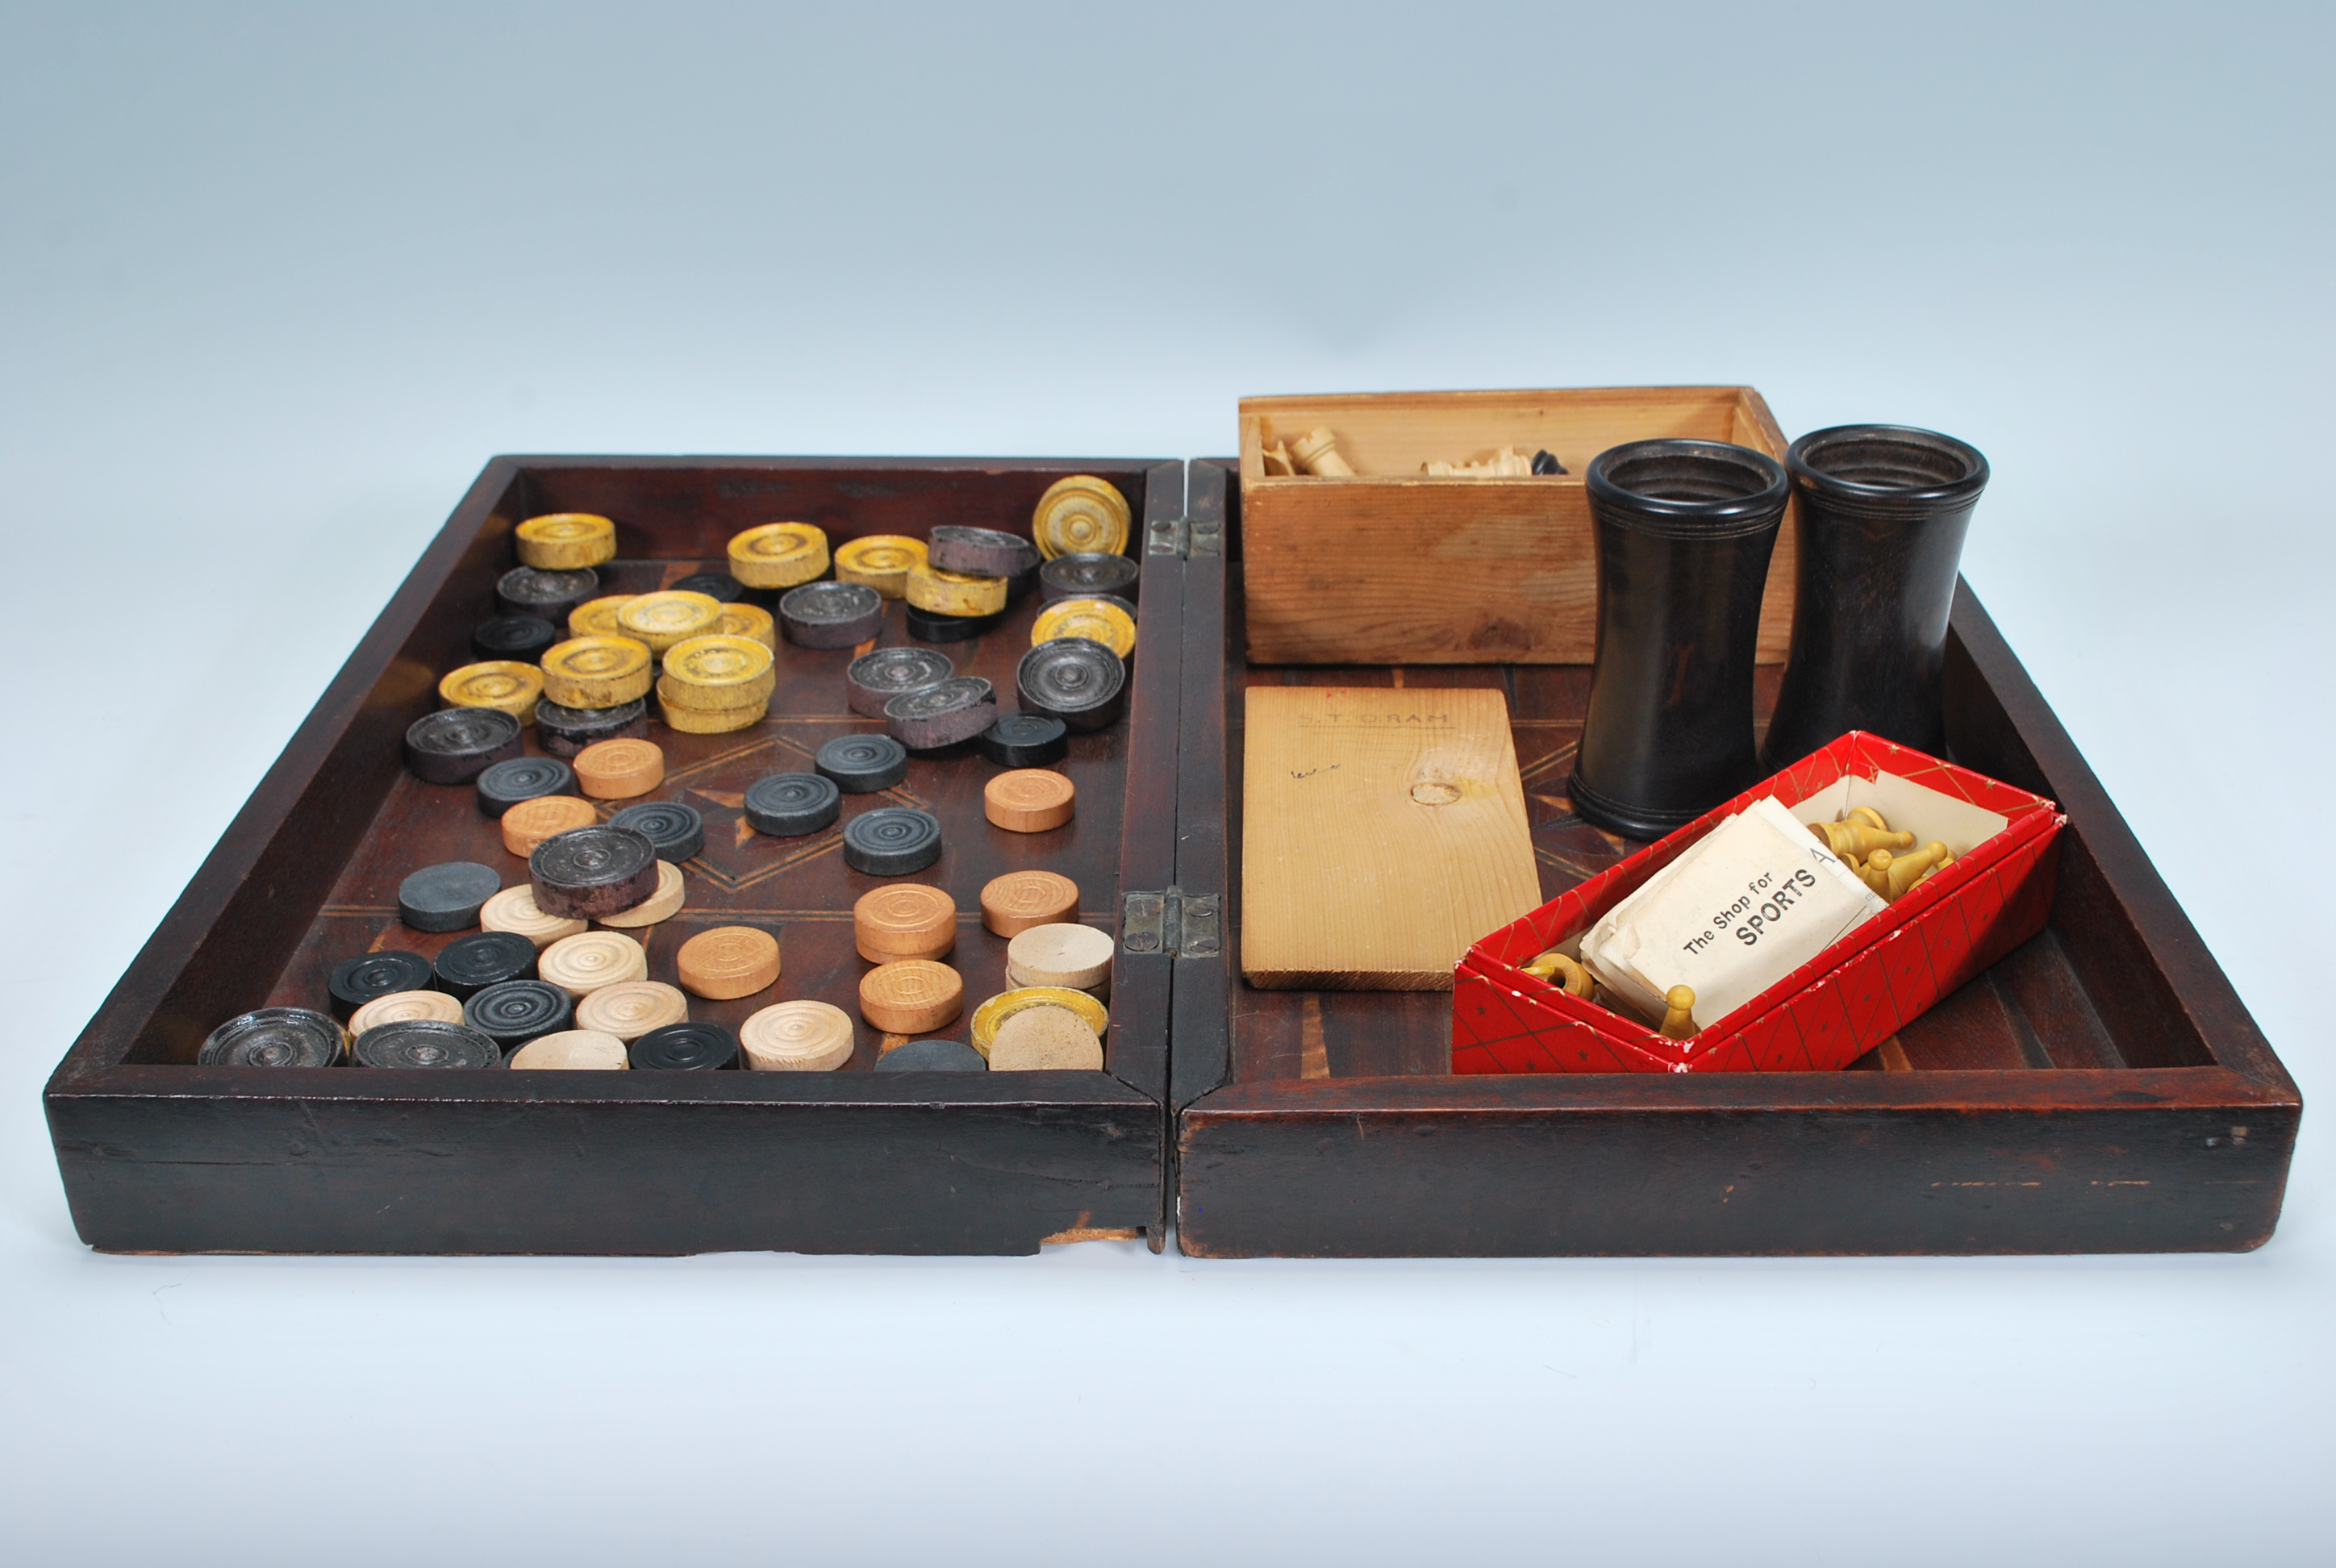 A 19th Century games compendium, in chequerboard case, the case opening up to become a backgammon